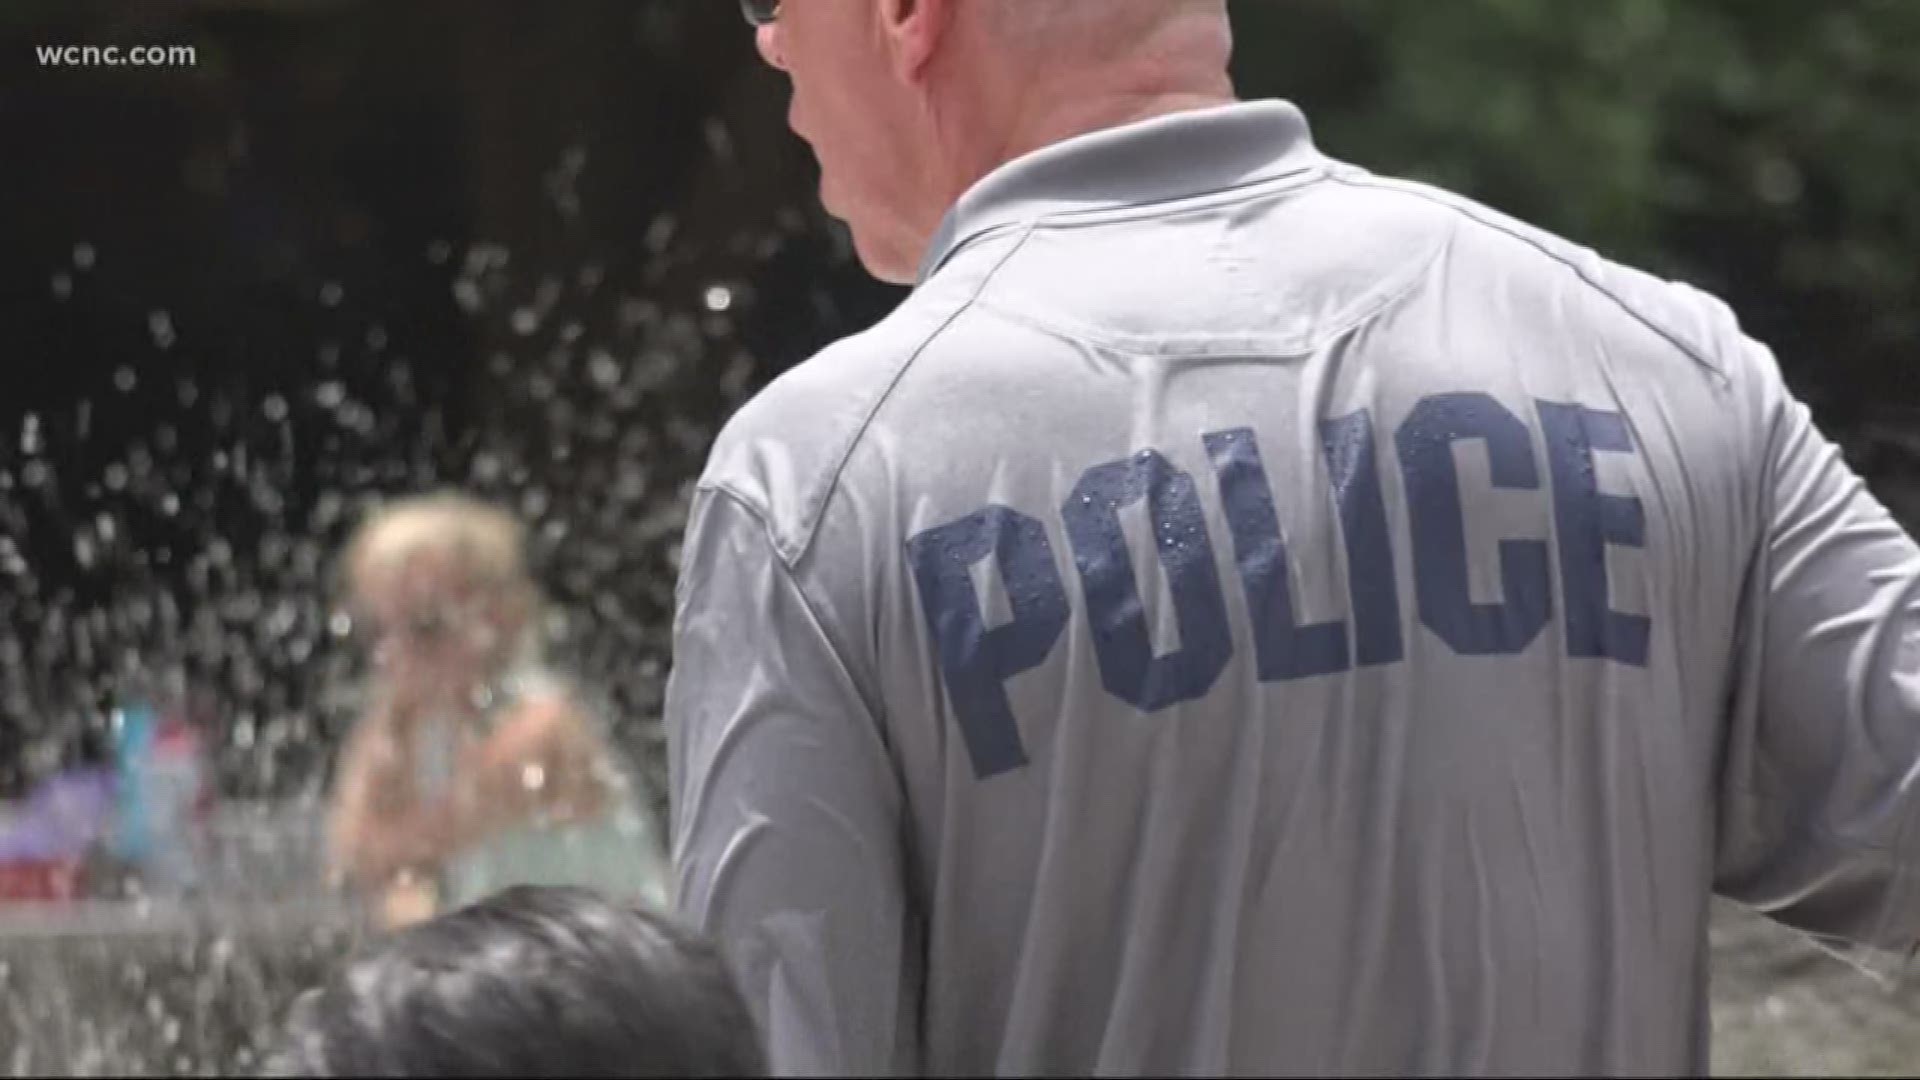 Cornelius Police are spreading a positive message while helping kids stay cool.